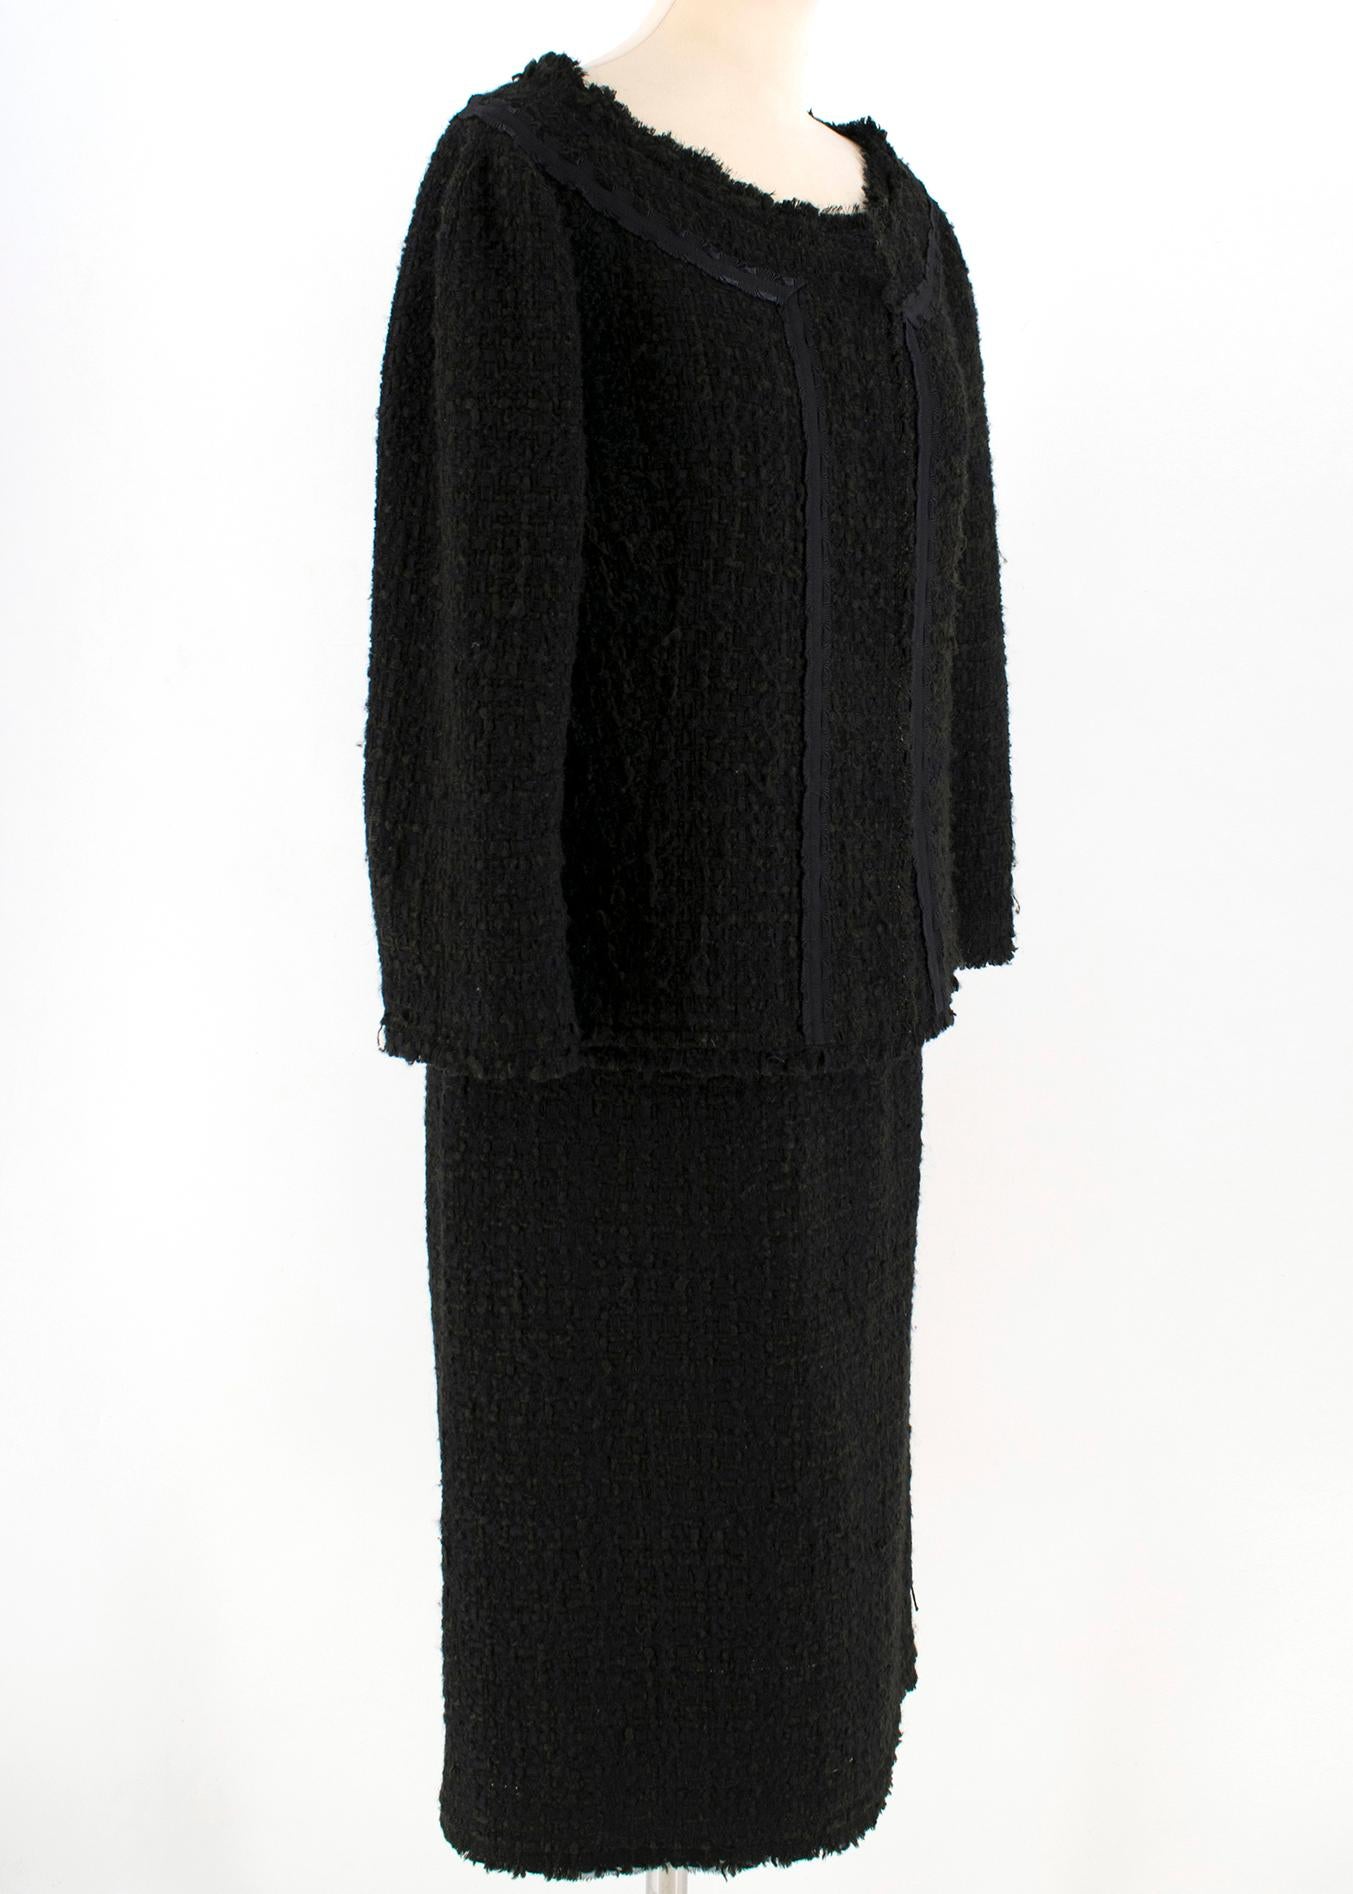 Alberta Ferretti Black Tweed Jacket & Skirt

- Black lining
- Scoop neck
- Jacket: Buttons closure at the front, skirt: zip closure at the back.


Approx.

Jacket:
Measurements are taken with the item lying flat, seam to